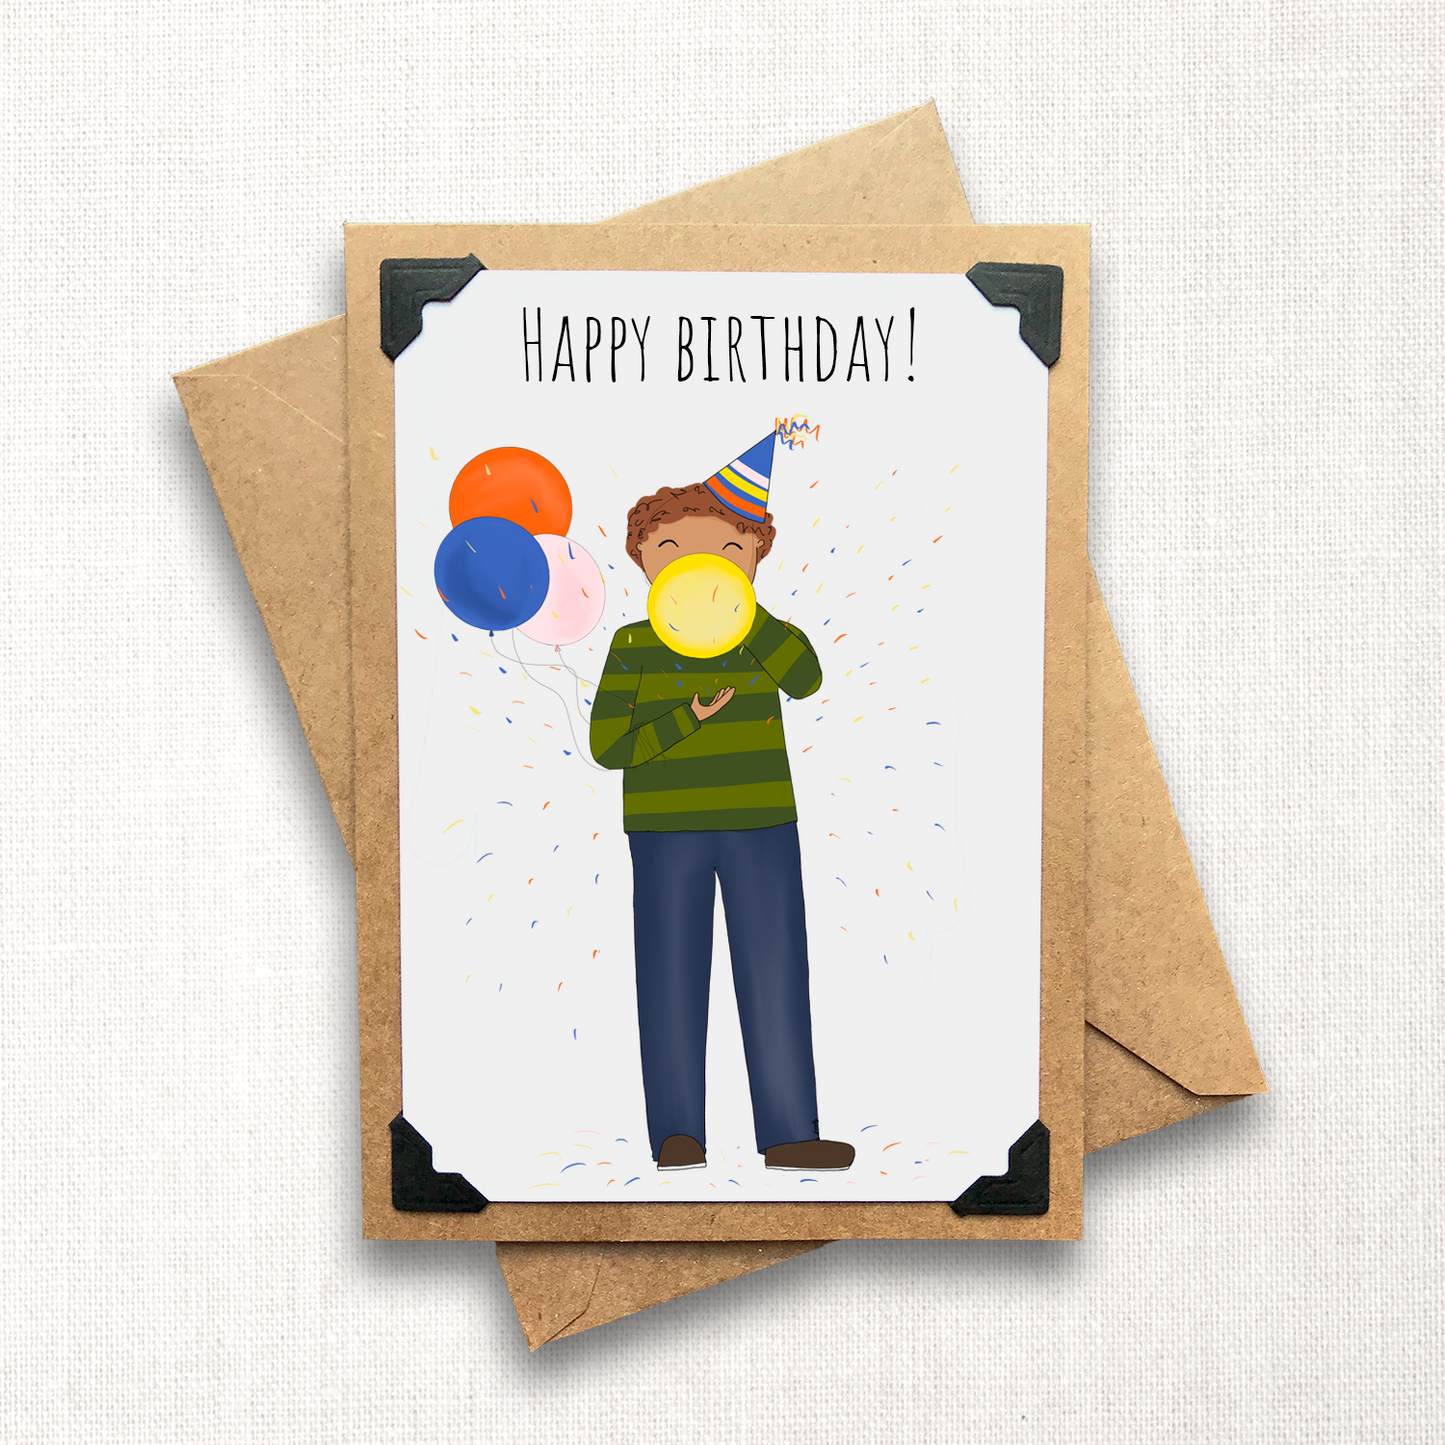 Happy Birthday (with balloons!) note card